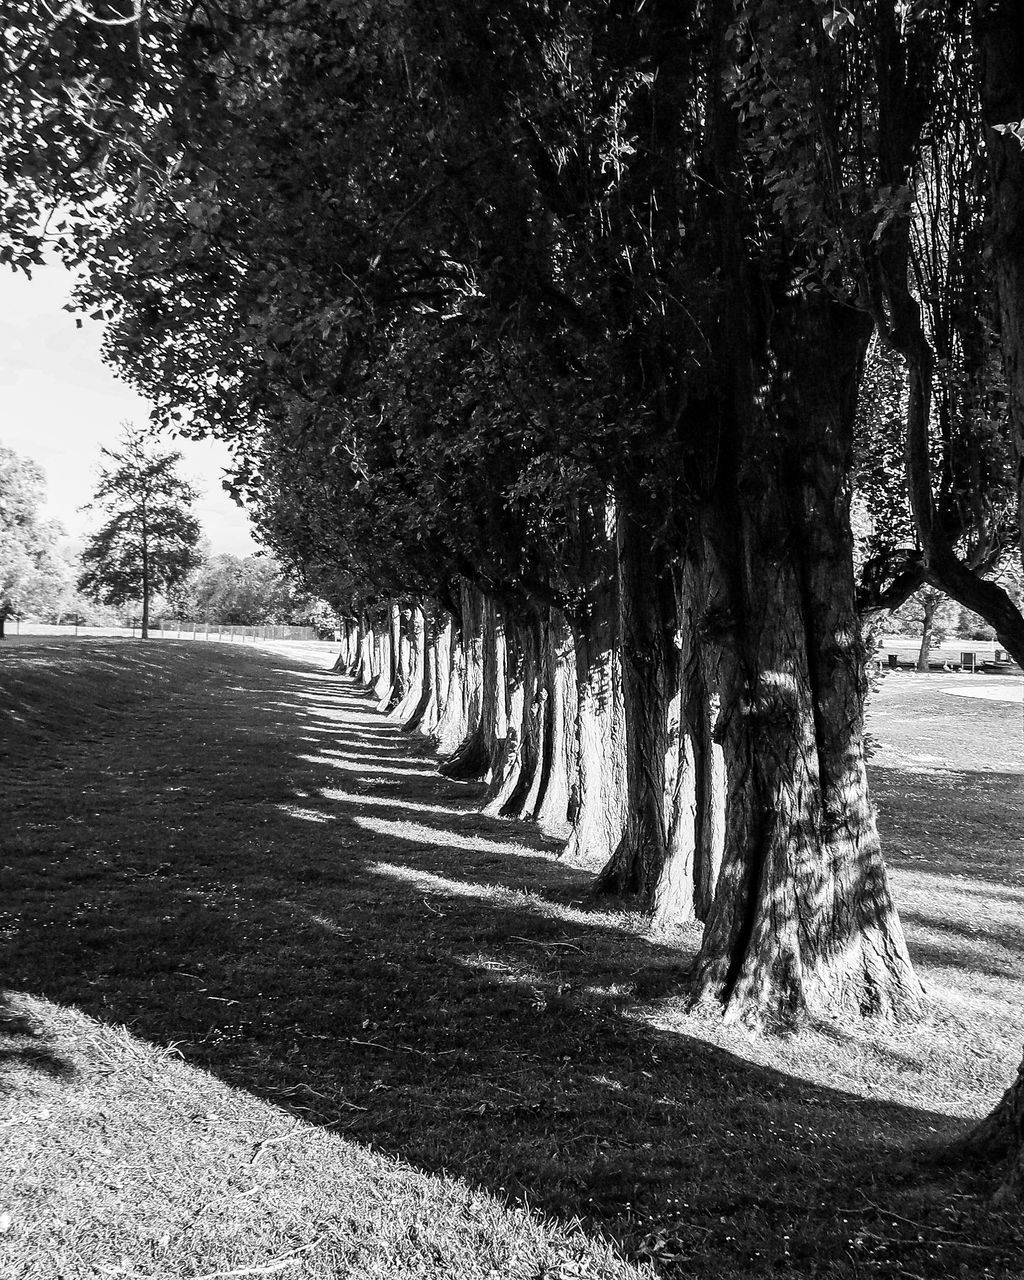 VIEW OF TREES IN THE PARK